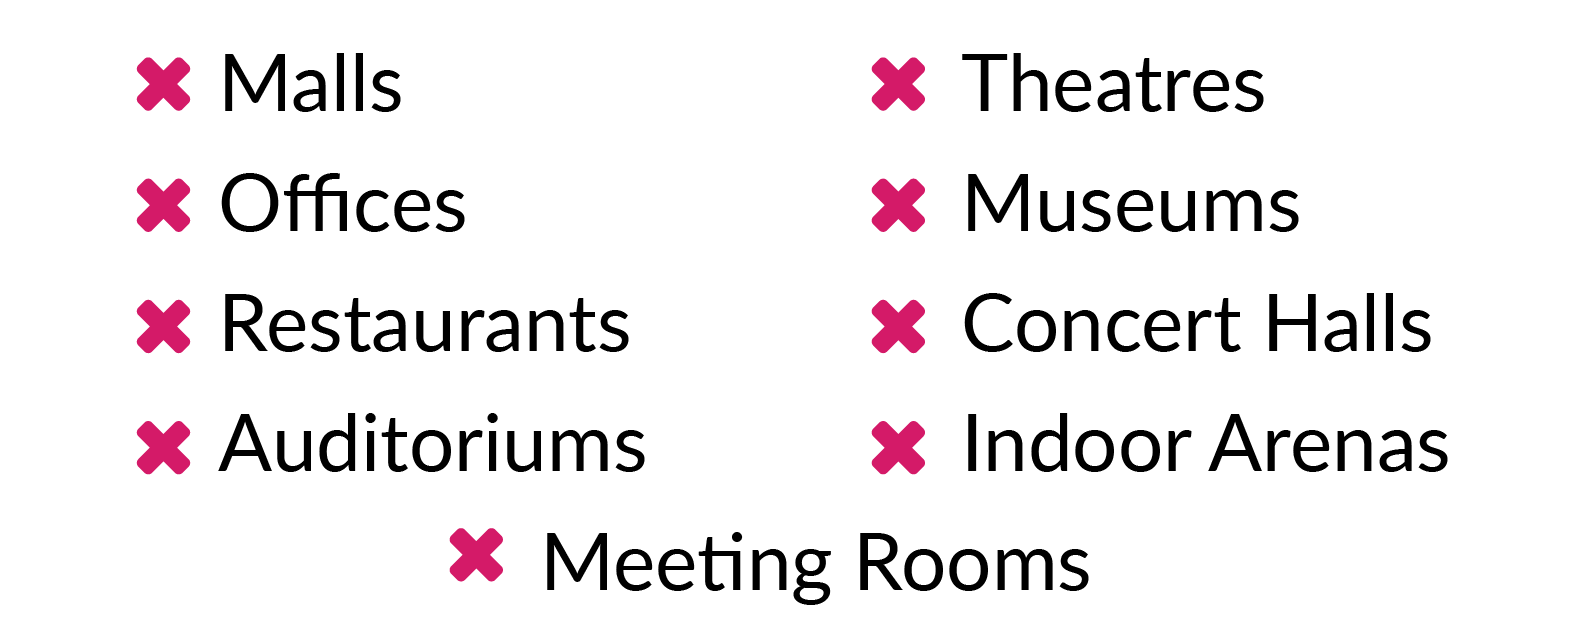 A list of designated public spaces, such as offices, restaurants, meeting rooms, theatres, and malls.